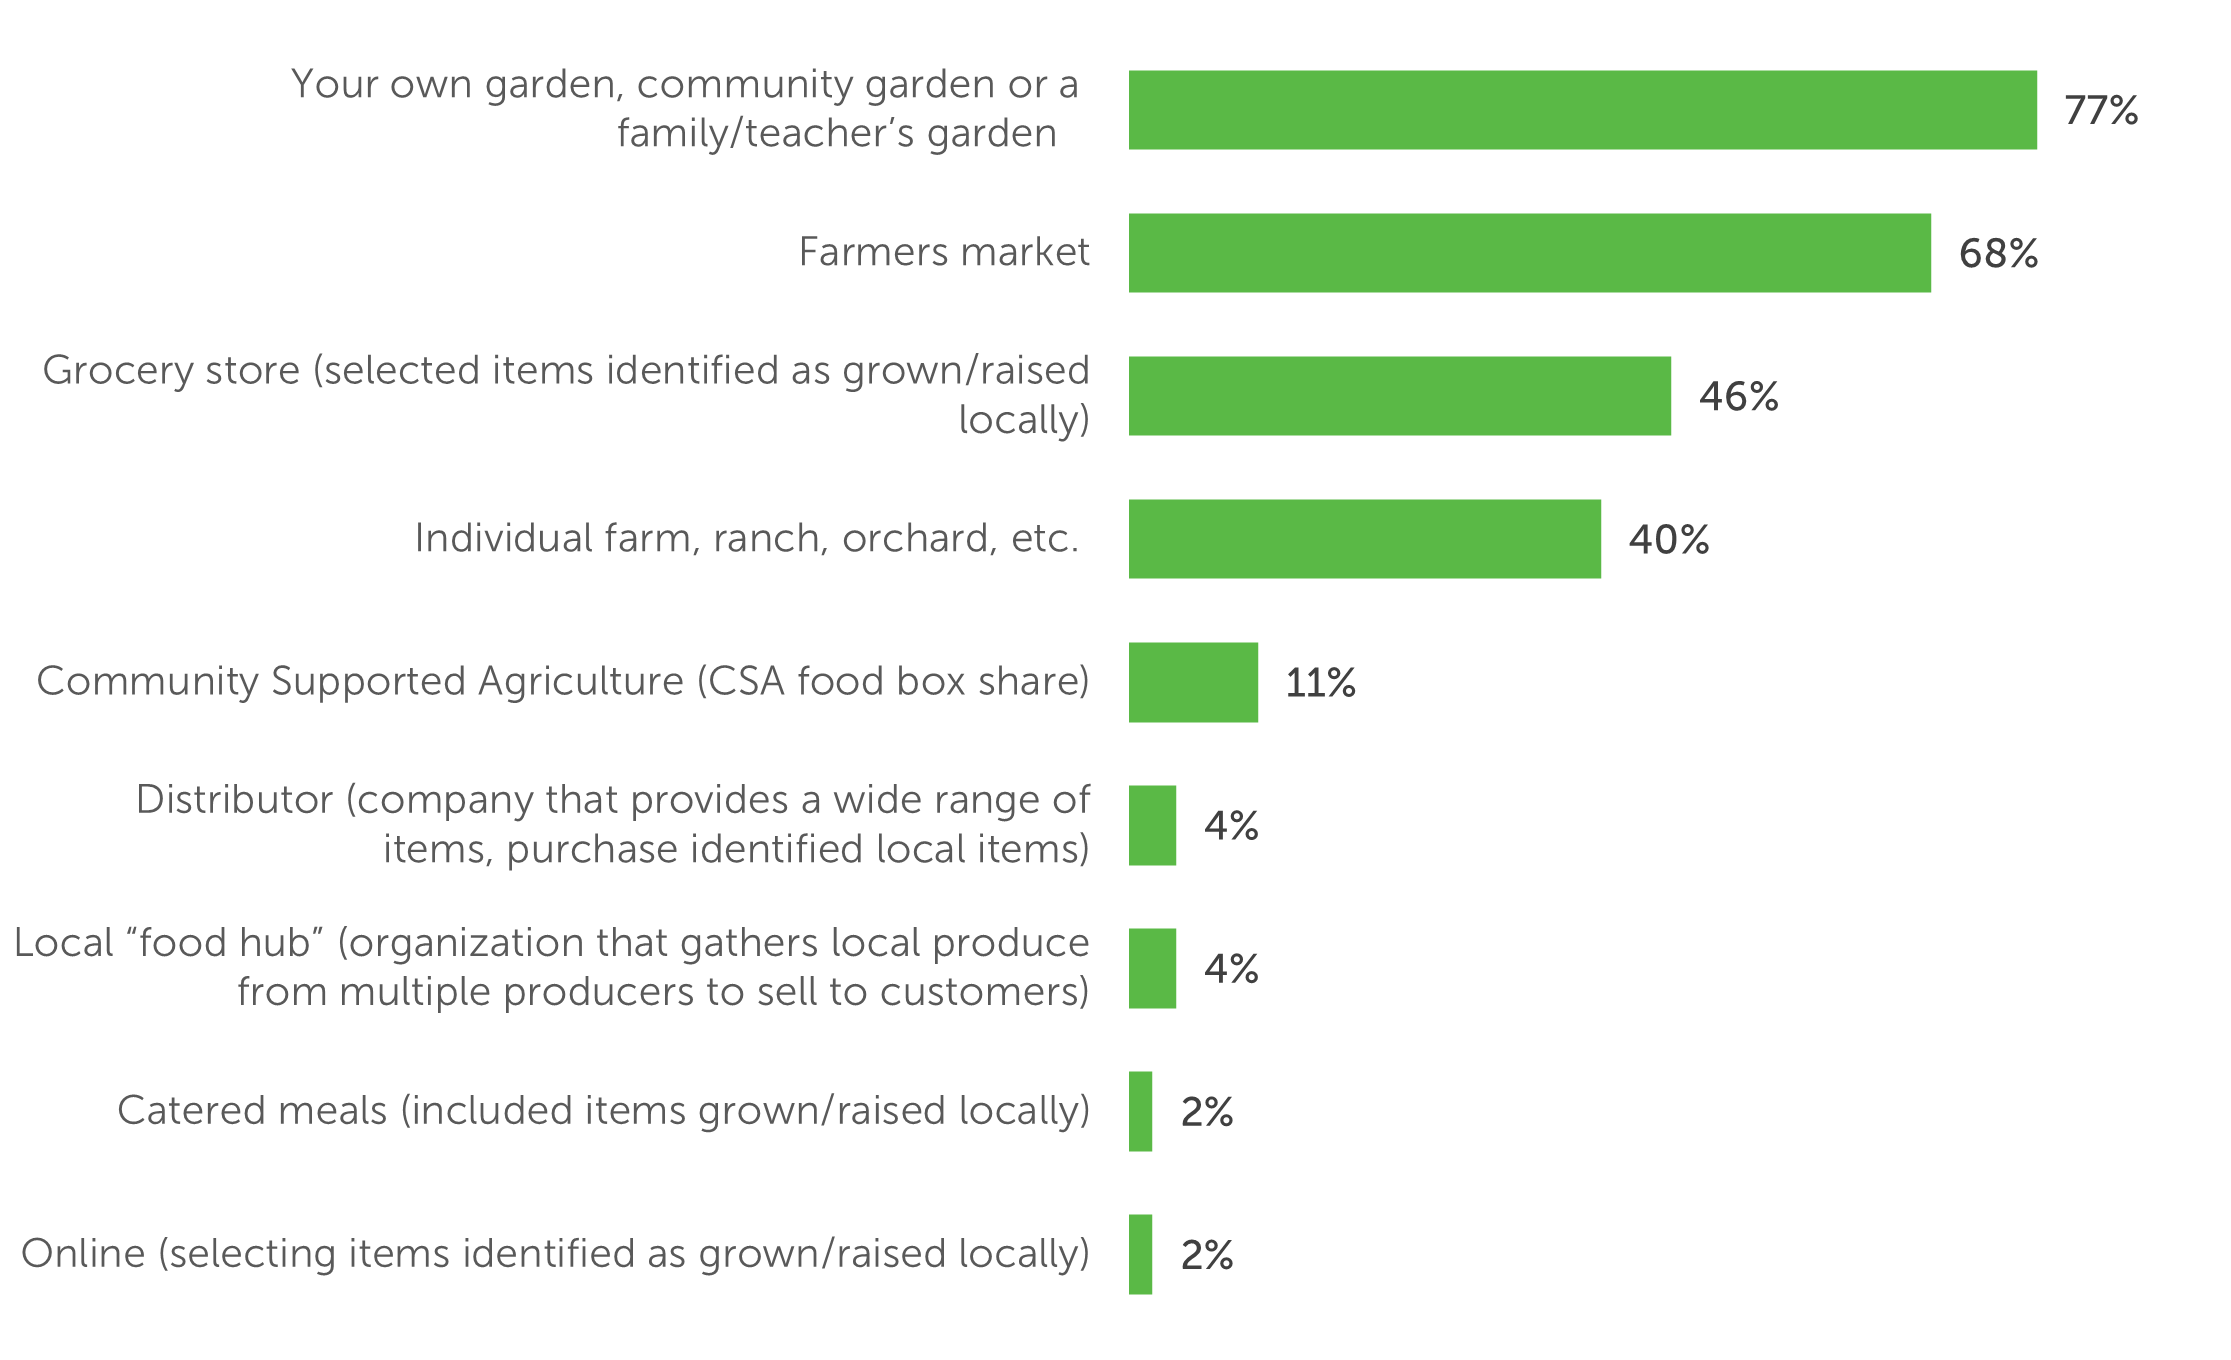 Your own garden, community garden or a family/teacher’s garden 188 (77%)    Farmers market 166 (68%)  Grocery store (selected items identified as grown/raised locally) 112 (46%)  Individual farm, ranch, orchard, etc.  98 (40%)  Community Supported Agriculture (CSA food box share) 28 (11%)  Distributor (company that provides a wide range of items, purchase identified local items, e.g., Sysco, Reinhart/Performance Foodservice, Upper Lakes Foods) 10 (4%)  Local “food hub” (organization that gathers local produce from multiple producers to sell to customers, e.g., Sprout, the Good Acre) 10 (4%)  Catered meals (included items grown/raised locally) 4 (2%)  Online (selecting items identified as grown/raised locally) 5 (2%) 